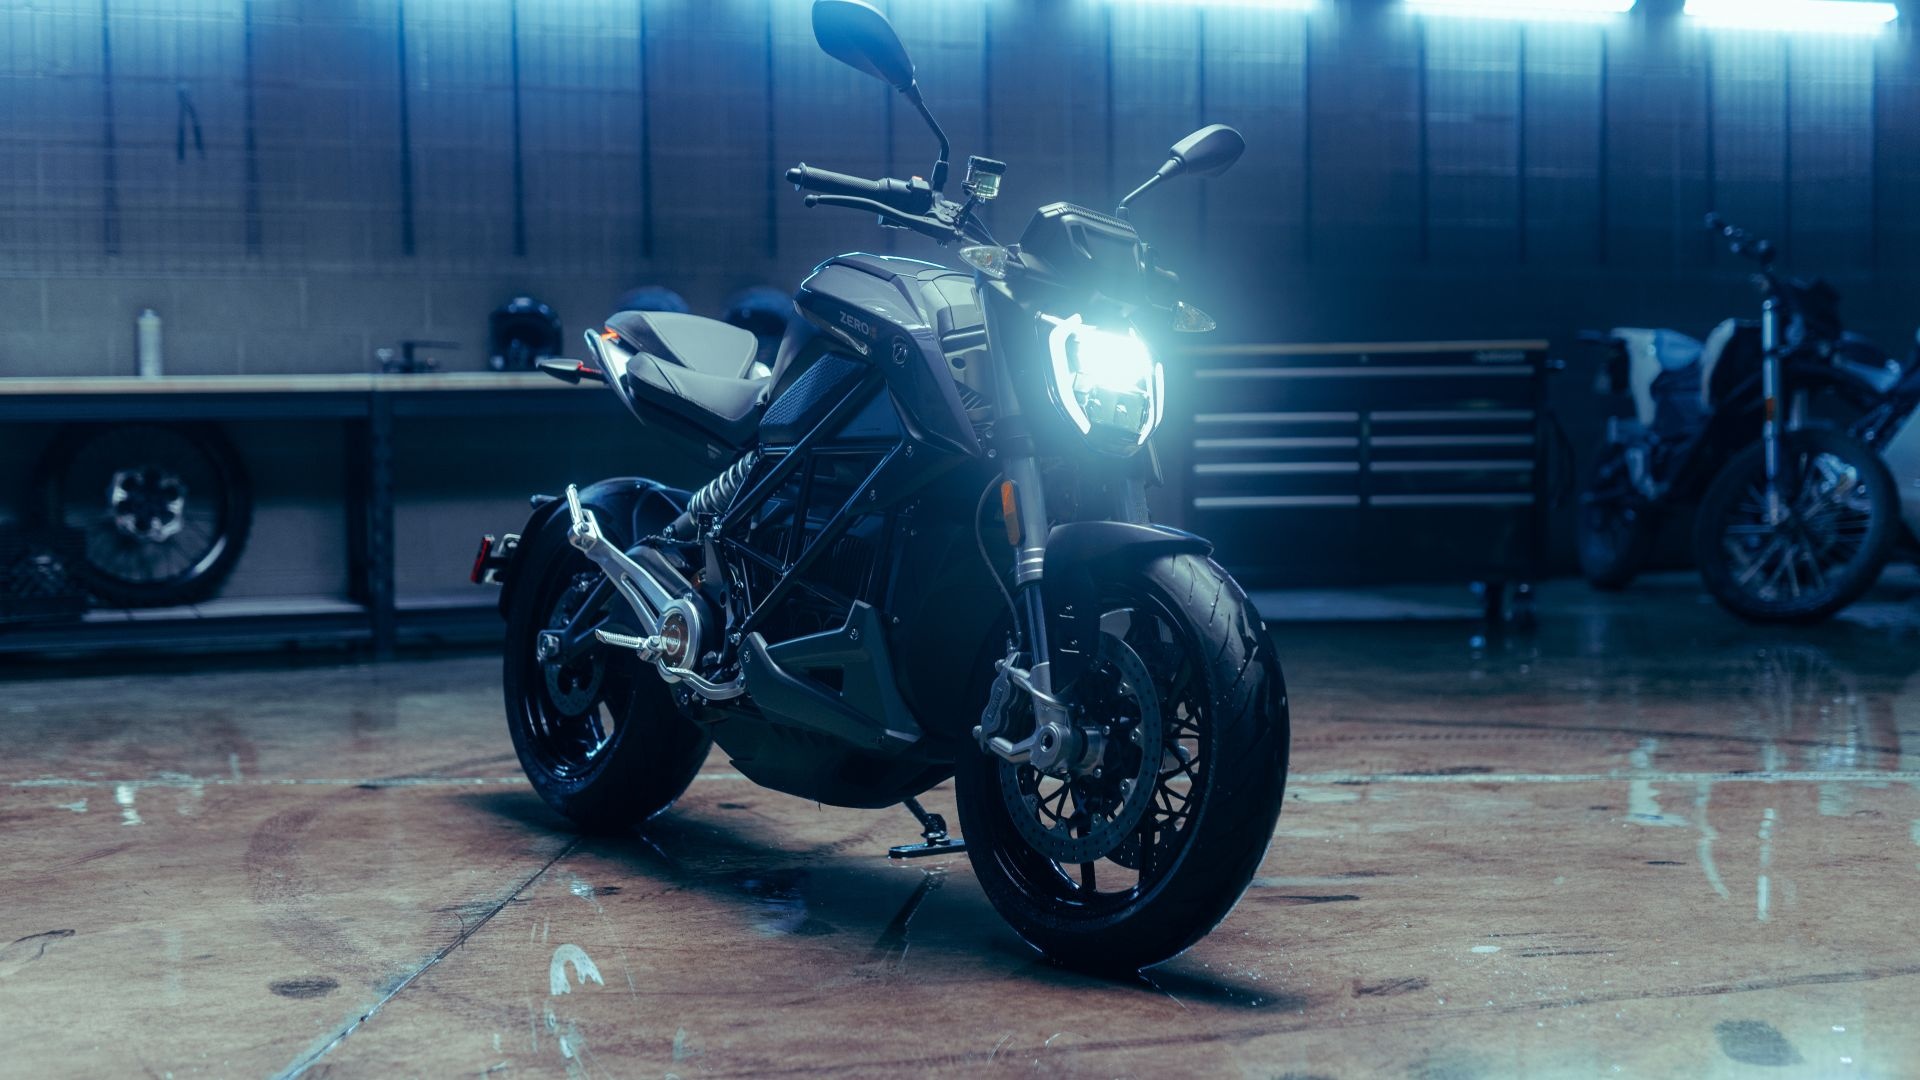 Zero Motorcycle, 17.3kWh battery, Live video from EICMA 2021, 1920x1080 Full HD Desktop